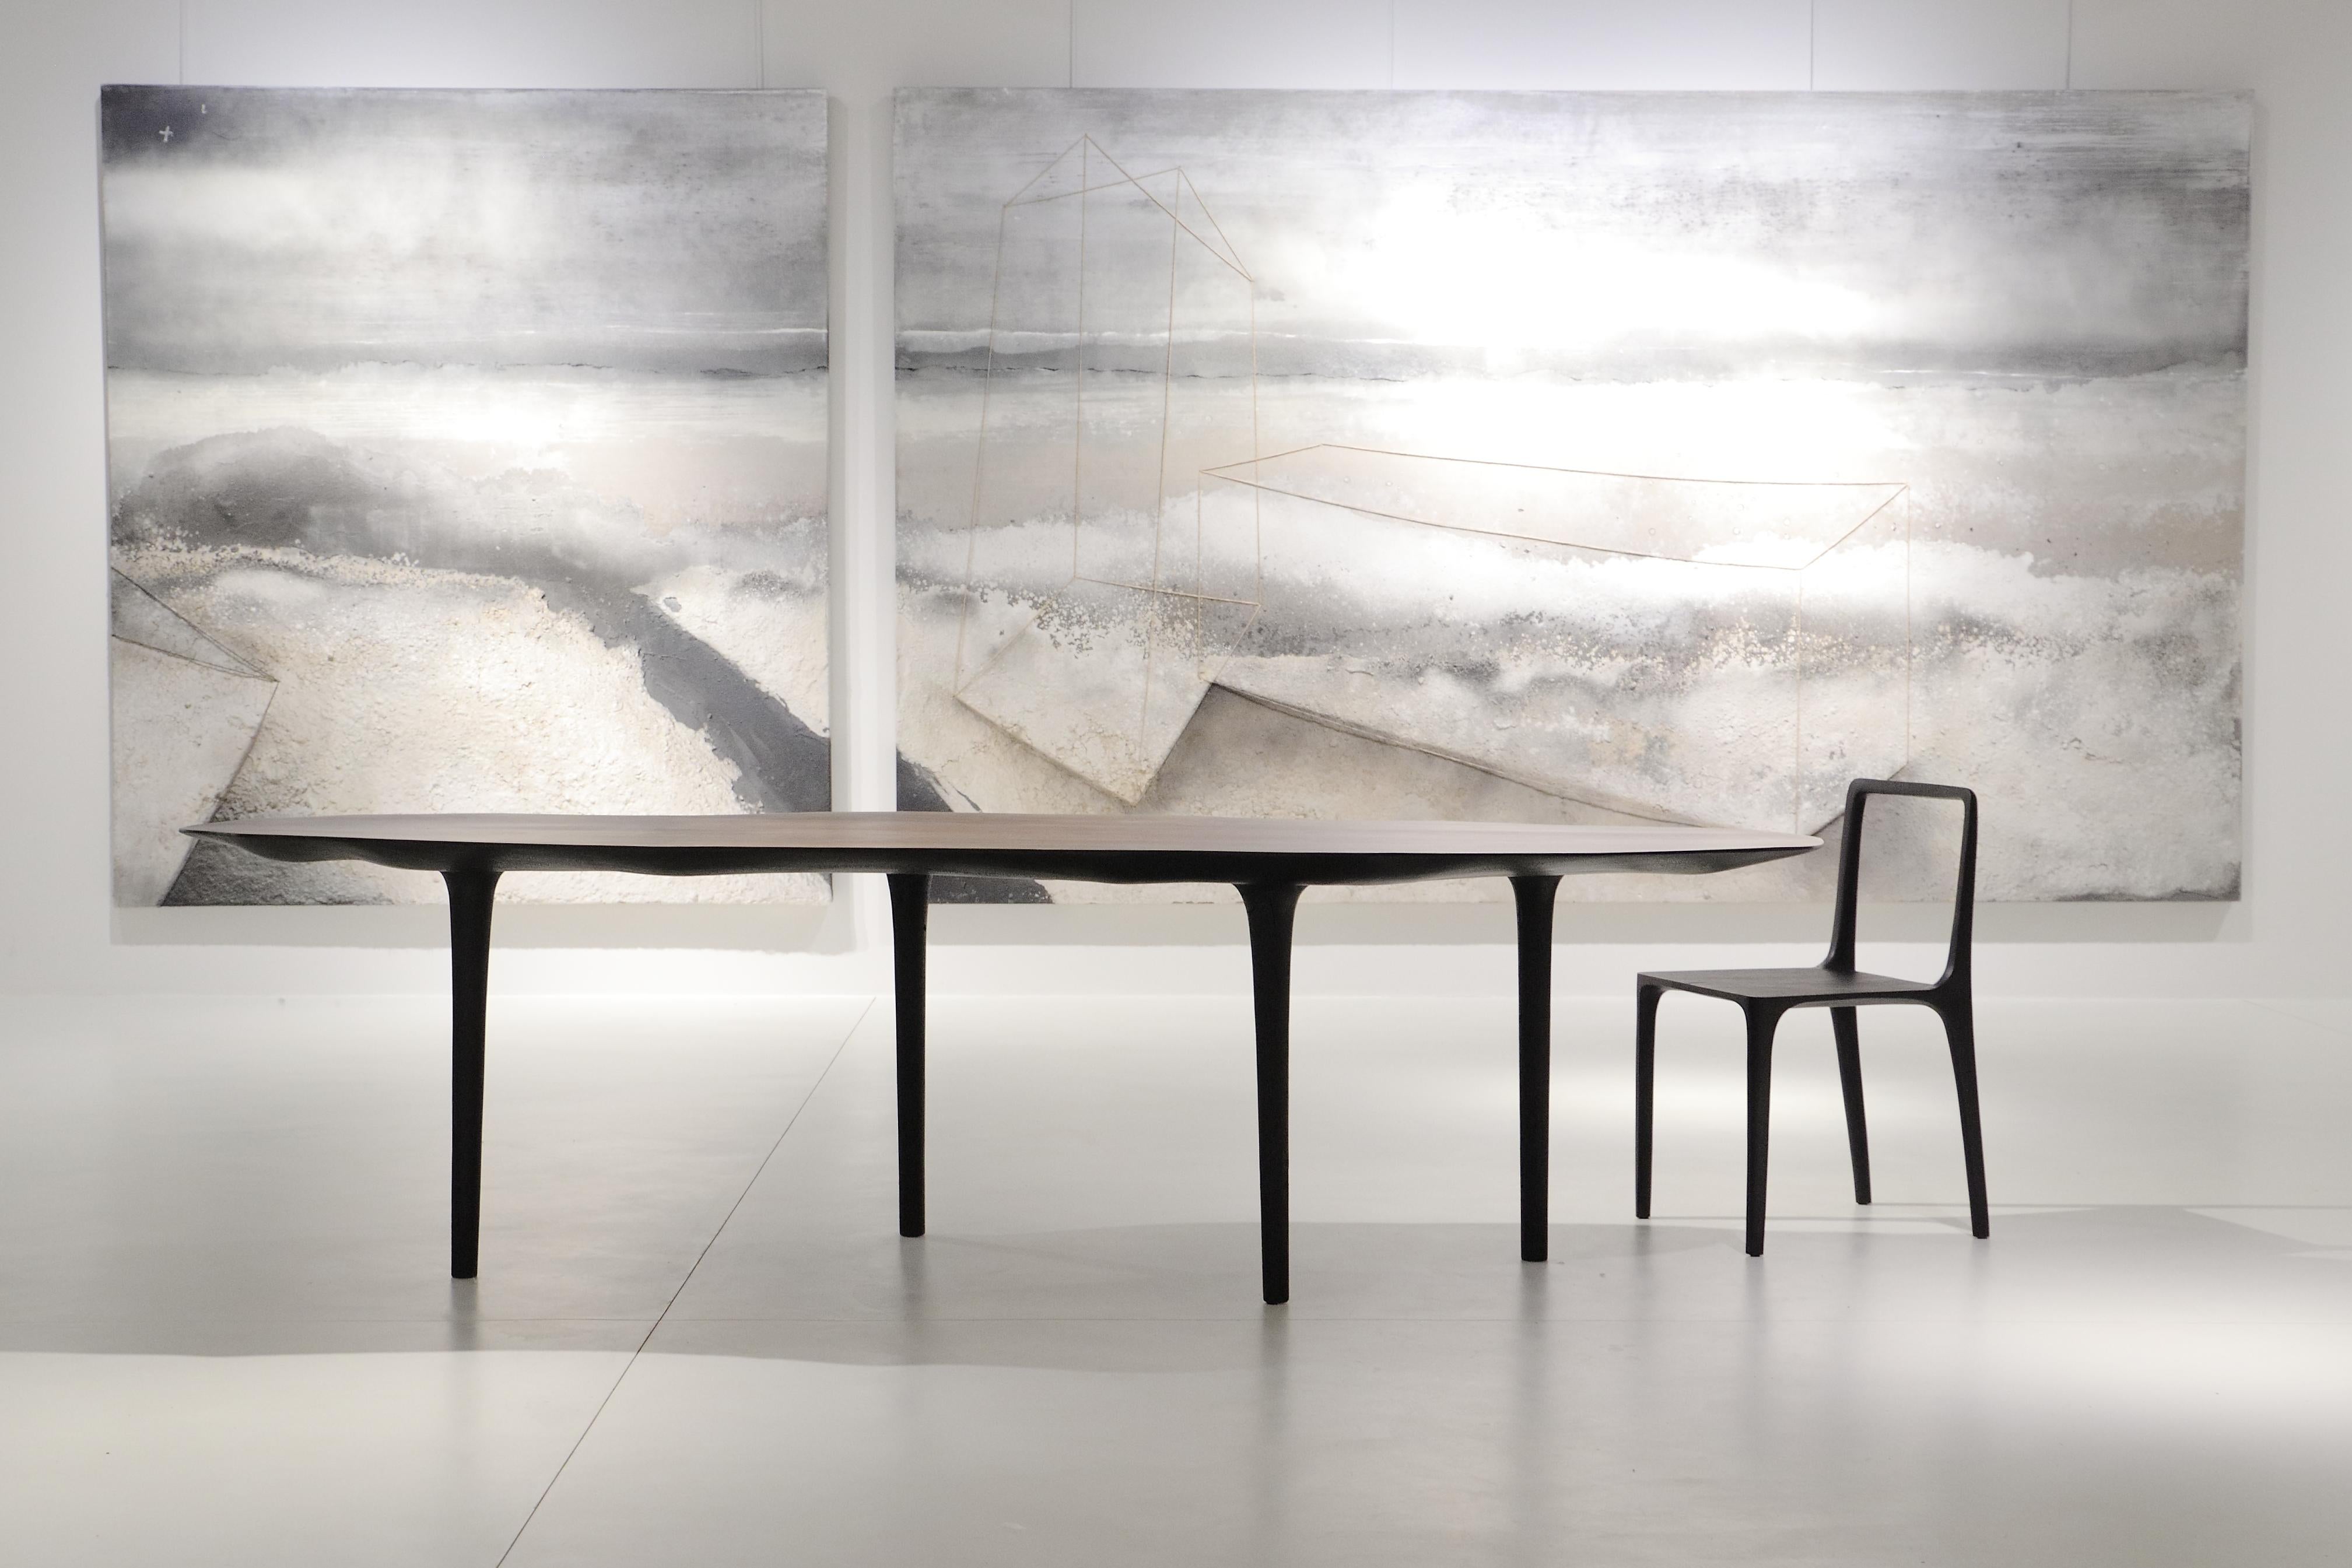 Modern Unique Sculptural Dining Table Signed by Cedric Breisacher